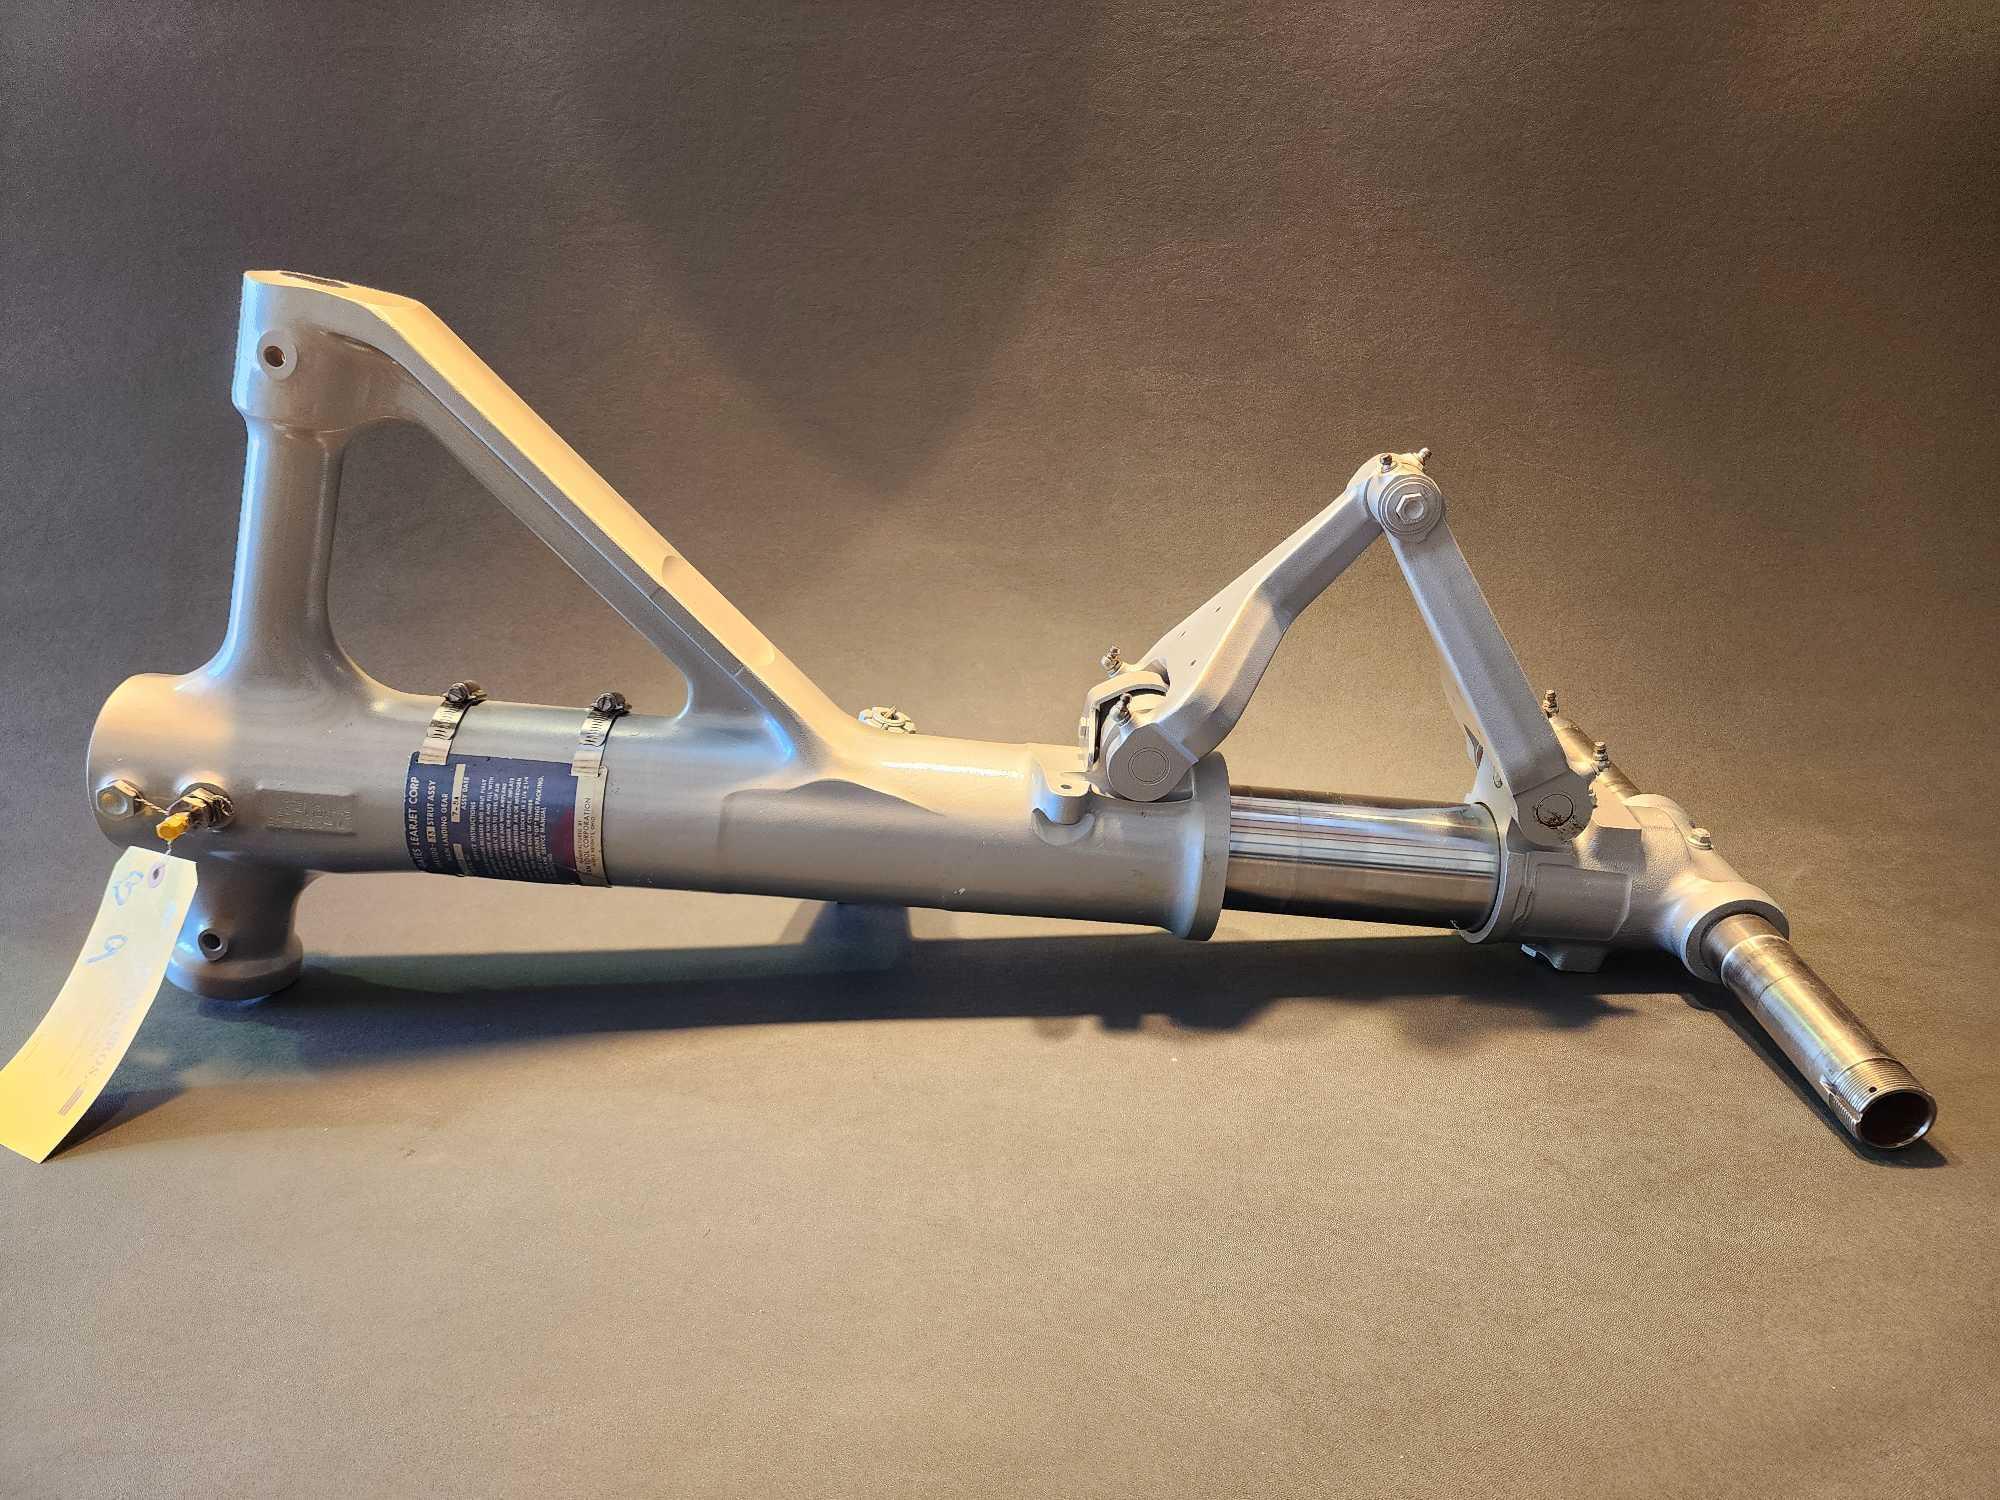 LEARJET L/H MAIN LANDING GEAR ASSY 5441100-33 (OVERHAULED) HAS COMPLIED WITH L-3 1000 CYCLE